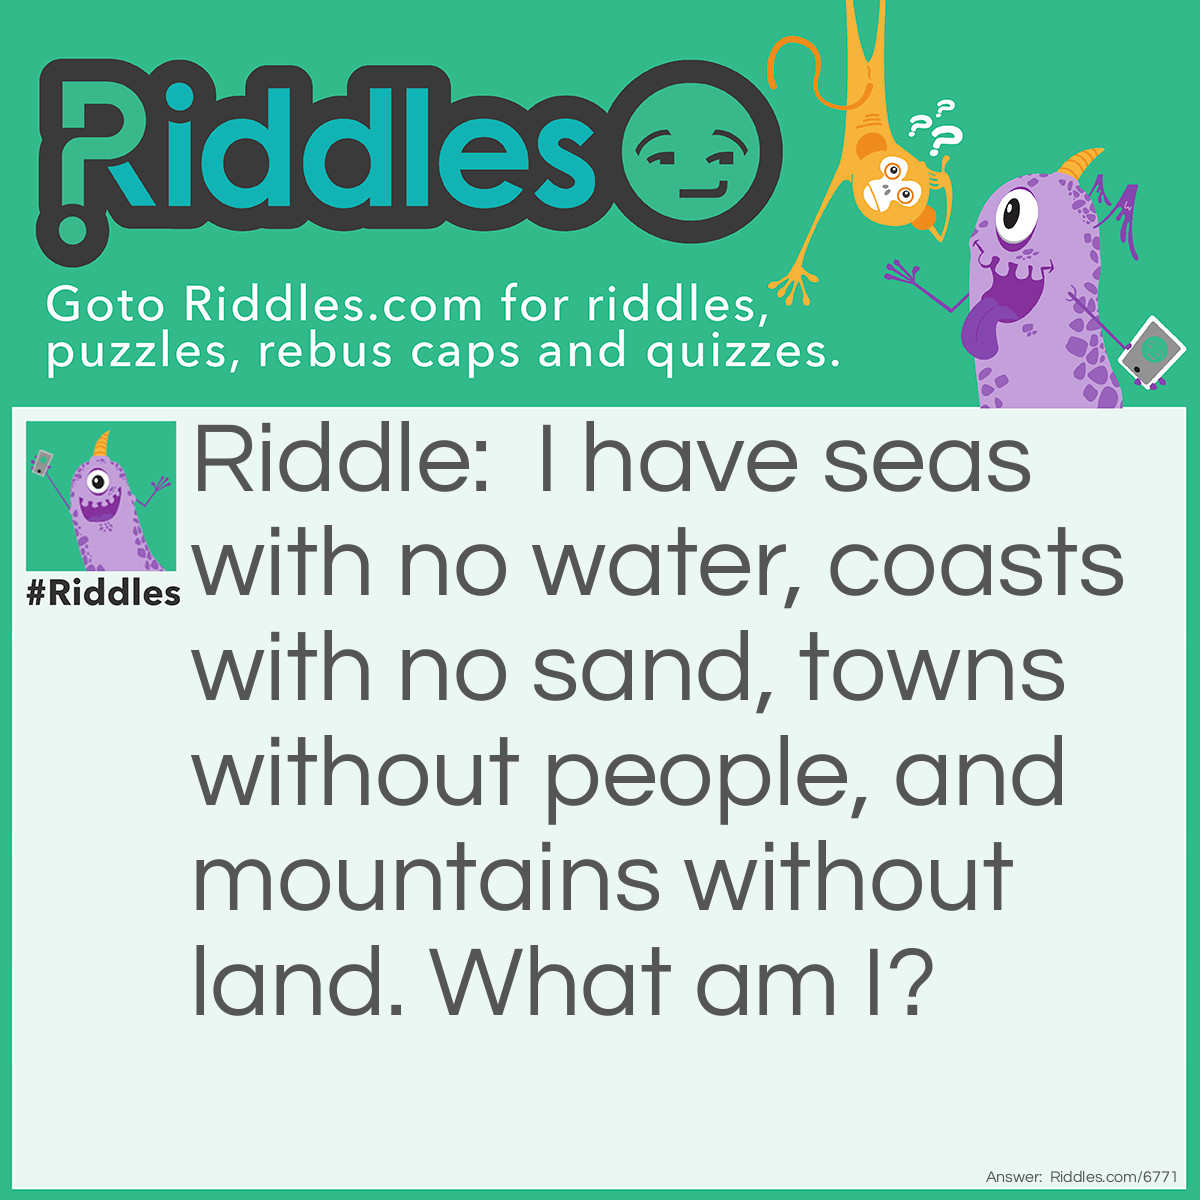 Riddle: I have seas with no water, coasts with no sand, towns without people and mountains with out land. What am I? Answer: A map.